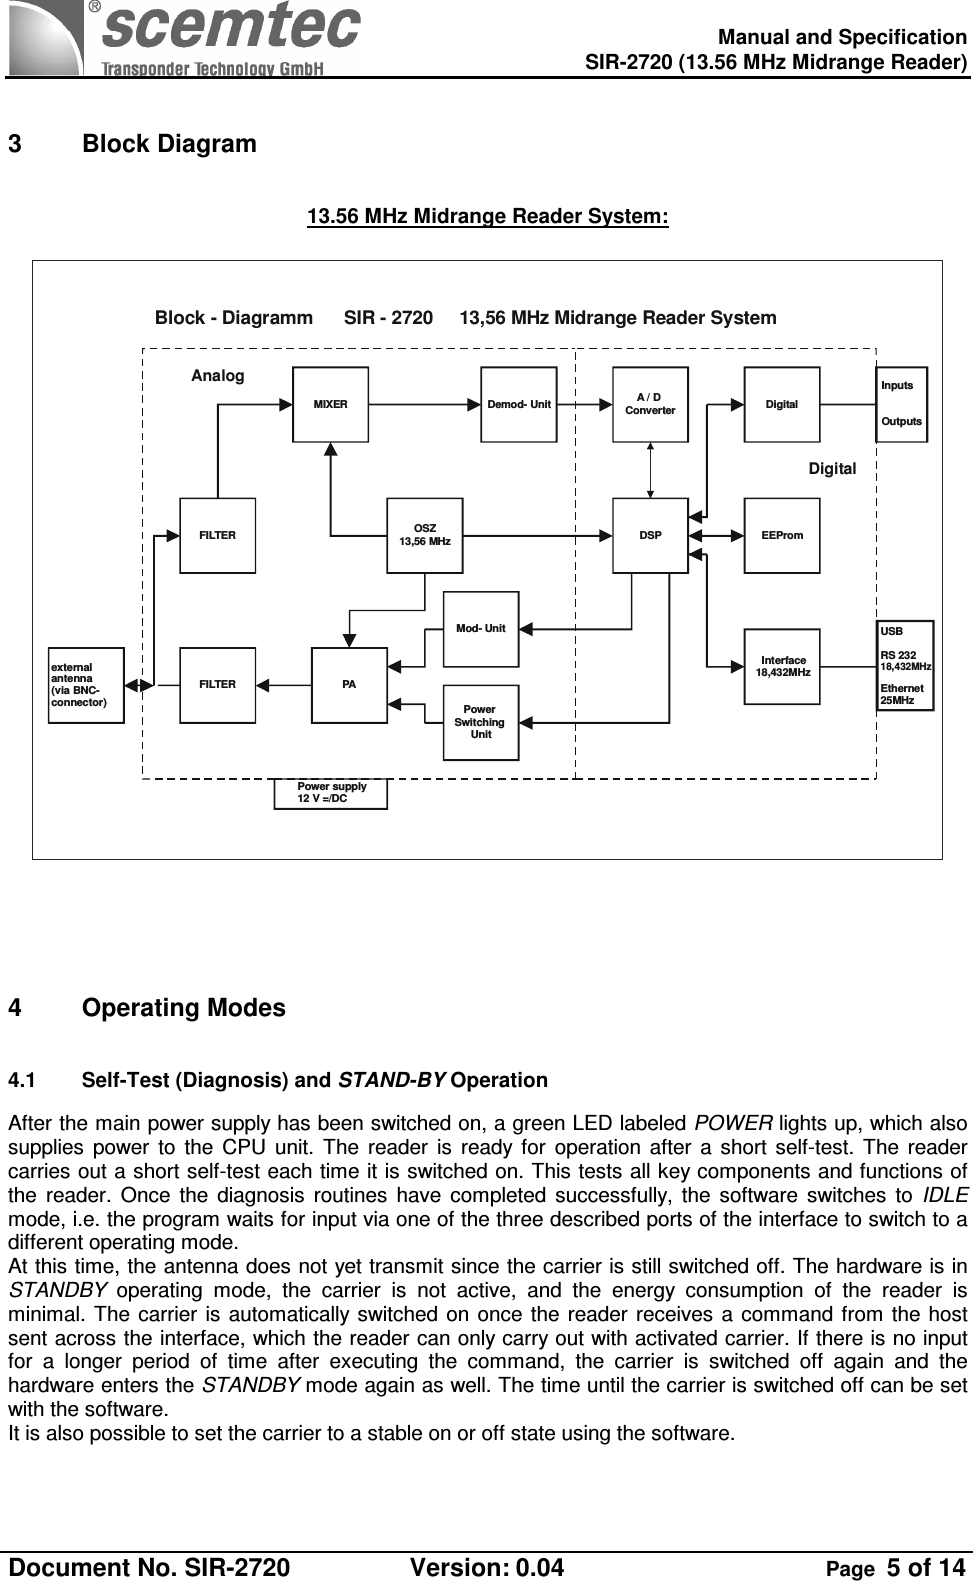    Manual and Specification  SIR-2720 (13.56 MHz Midrange Reader)  Document No. SIR-2720  Version: 0.04  Page  5 of 14   3  Block Diagram  13.56 MHz Midrange Reader System:  Power supply12 V =/DCexternalantenna(via BNC-connector)Mod- UnitFILTERPower Switching UnitFILTERMIXEROSZ13,56 MHzDemod- UnitA / D ConverterDigitalInputsOutputsUSBRS 232Ethernet25MHz18,432MHzDSPEEProm  Interface18,432MHzBlock - Diagramm      SIR - 2720     13,56 MHz Midrange Reader SystemPAAnalogDigital   4  Operating Modes 4.1  Self-Test (Diagnosis) and STAND-BY Operation After the main power supply has been switched on, a green LED labeled POWER lights up, which also supplies  power  to  the  CPU  unit.  The  reader  is  ready  for  operation  after  a  short  self-test.  The  reader carries out a short self-test each time it is switched on. This tests all key components and functions of the  reader.  Once  the  diagnosis  routines  have  completed  successfully,  the  software  switches  to  IDLE mode, i.e. the program waits for input via one of the three described ports of the interface to switch to a different operating mode.  At this time, the antenna does not yet transmit since the carrier is still switched off. The hardware is in STANDBY  operating  mode,  the  carrier  is  not  active,  and  the  energy  consumption  of  the  reader  is minimal. The  carrier  is  automatically  switched on once the reader receives a command from the host sent across the interface, which the reader can only carry out with activated carrier. If there is no input for  a  longer  period  of  time  after  executing  the  command,  the  carrier  is  switched  off  again  and  the hardware enters the STANDBY mode again as well. The time until the carrier is switched off can be set with the software.  It is also possible to set the carrier to a stable on or off state using the software. 